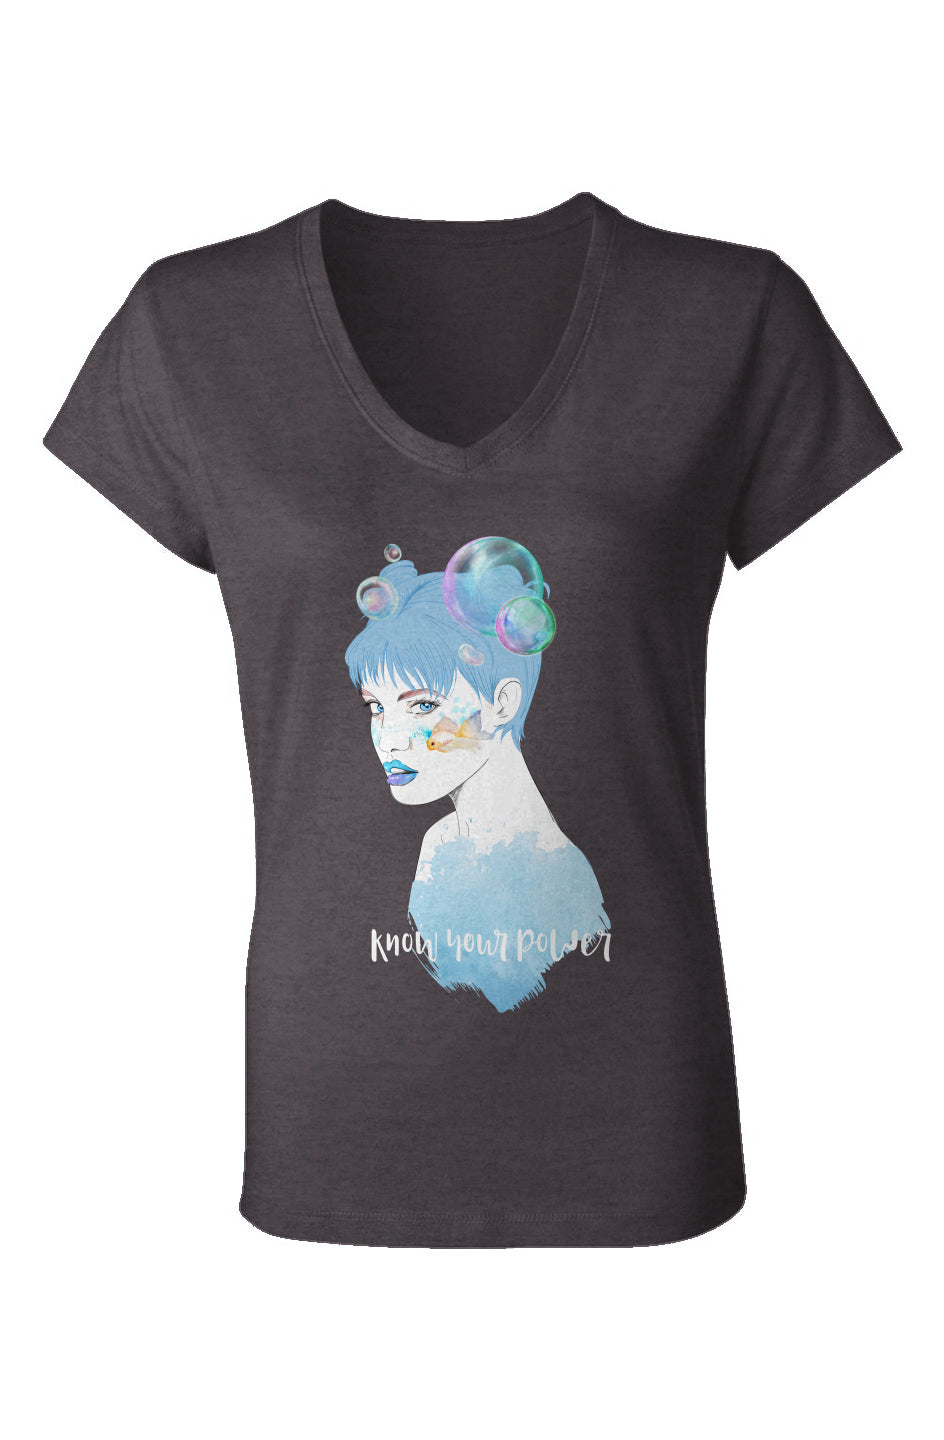 Ladies"Know Your Power" V-Neck 